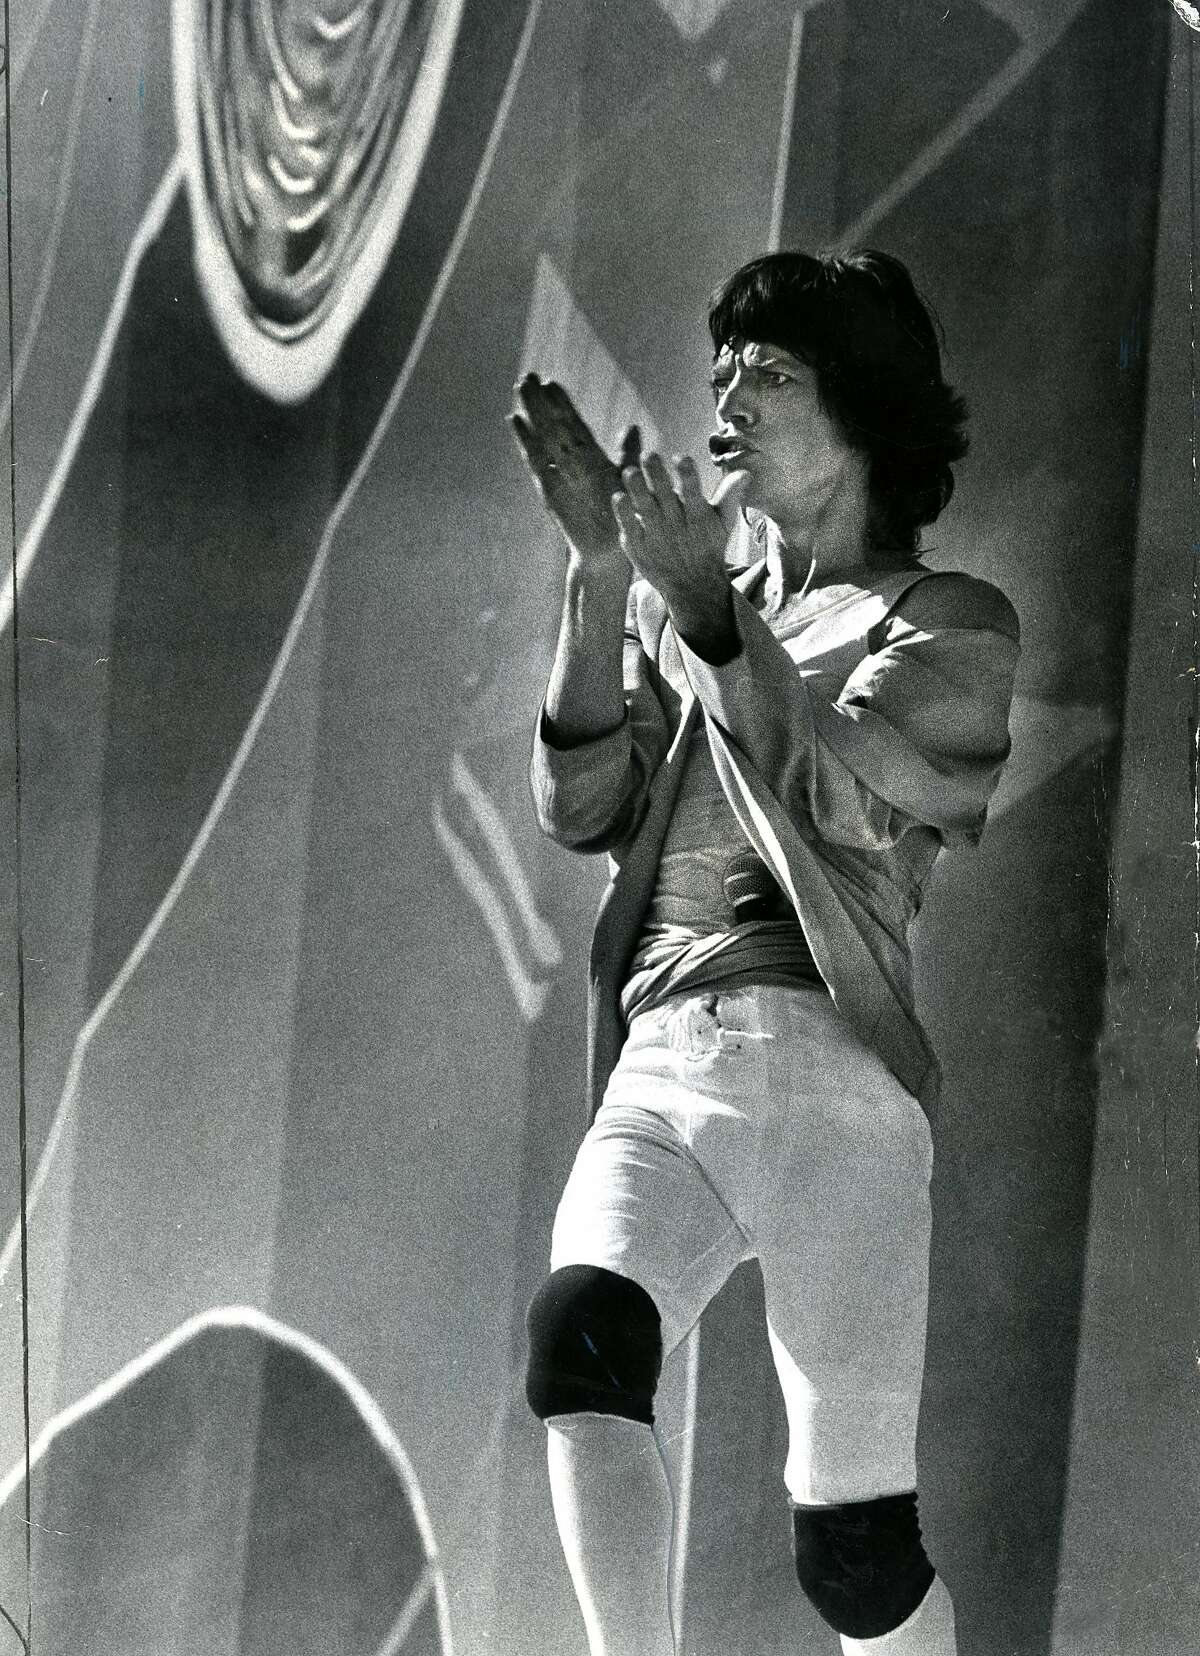 Mick Jagger of the Rolling Stones, October 16, 1981 Photo ran October 19, 1981, P.42